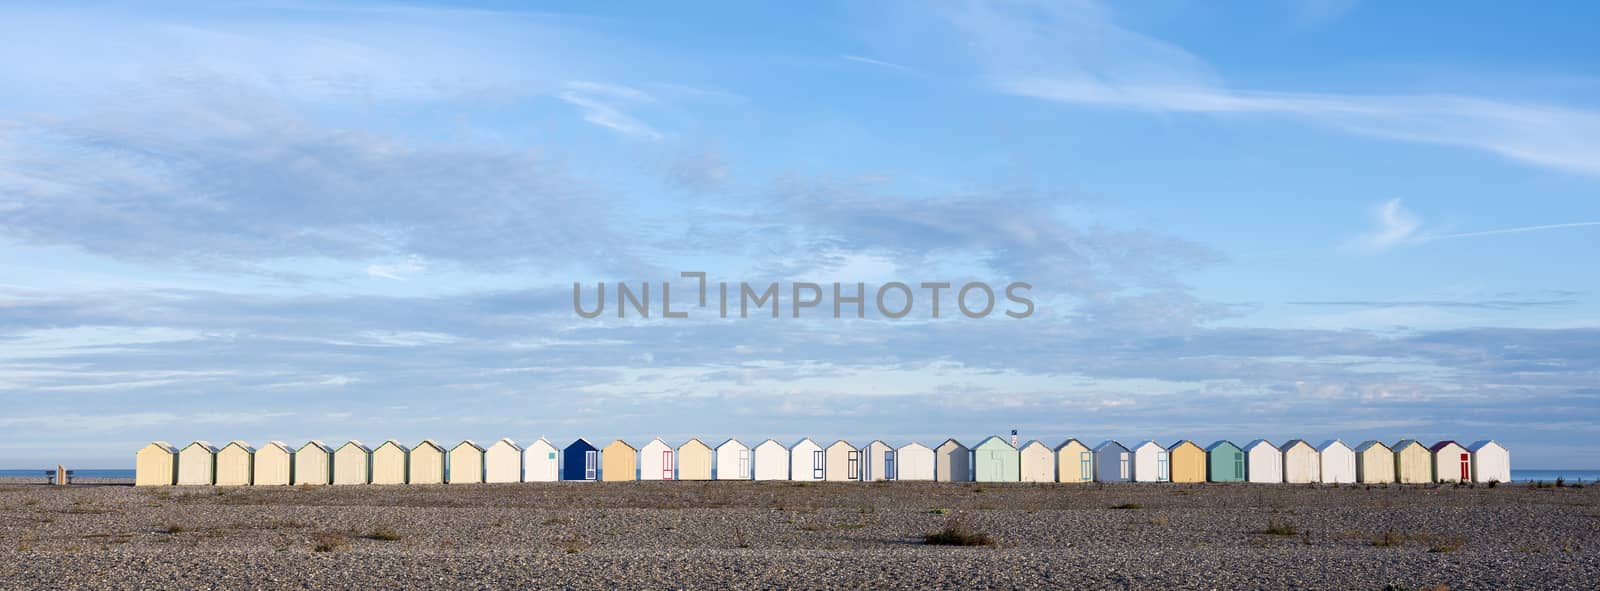 beach huts in cayeux s mer in french normandy under blue sky by ahavelaar